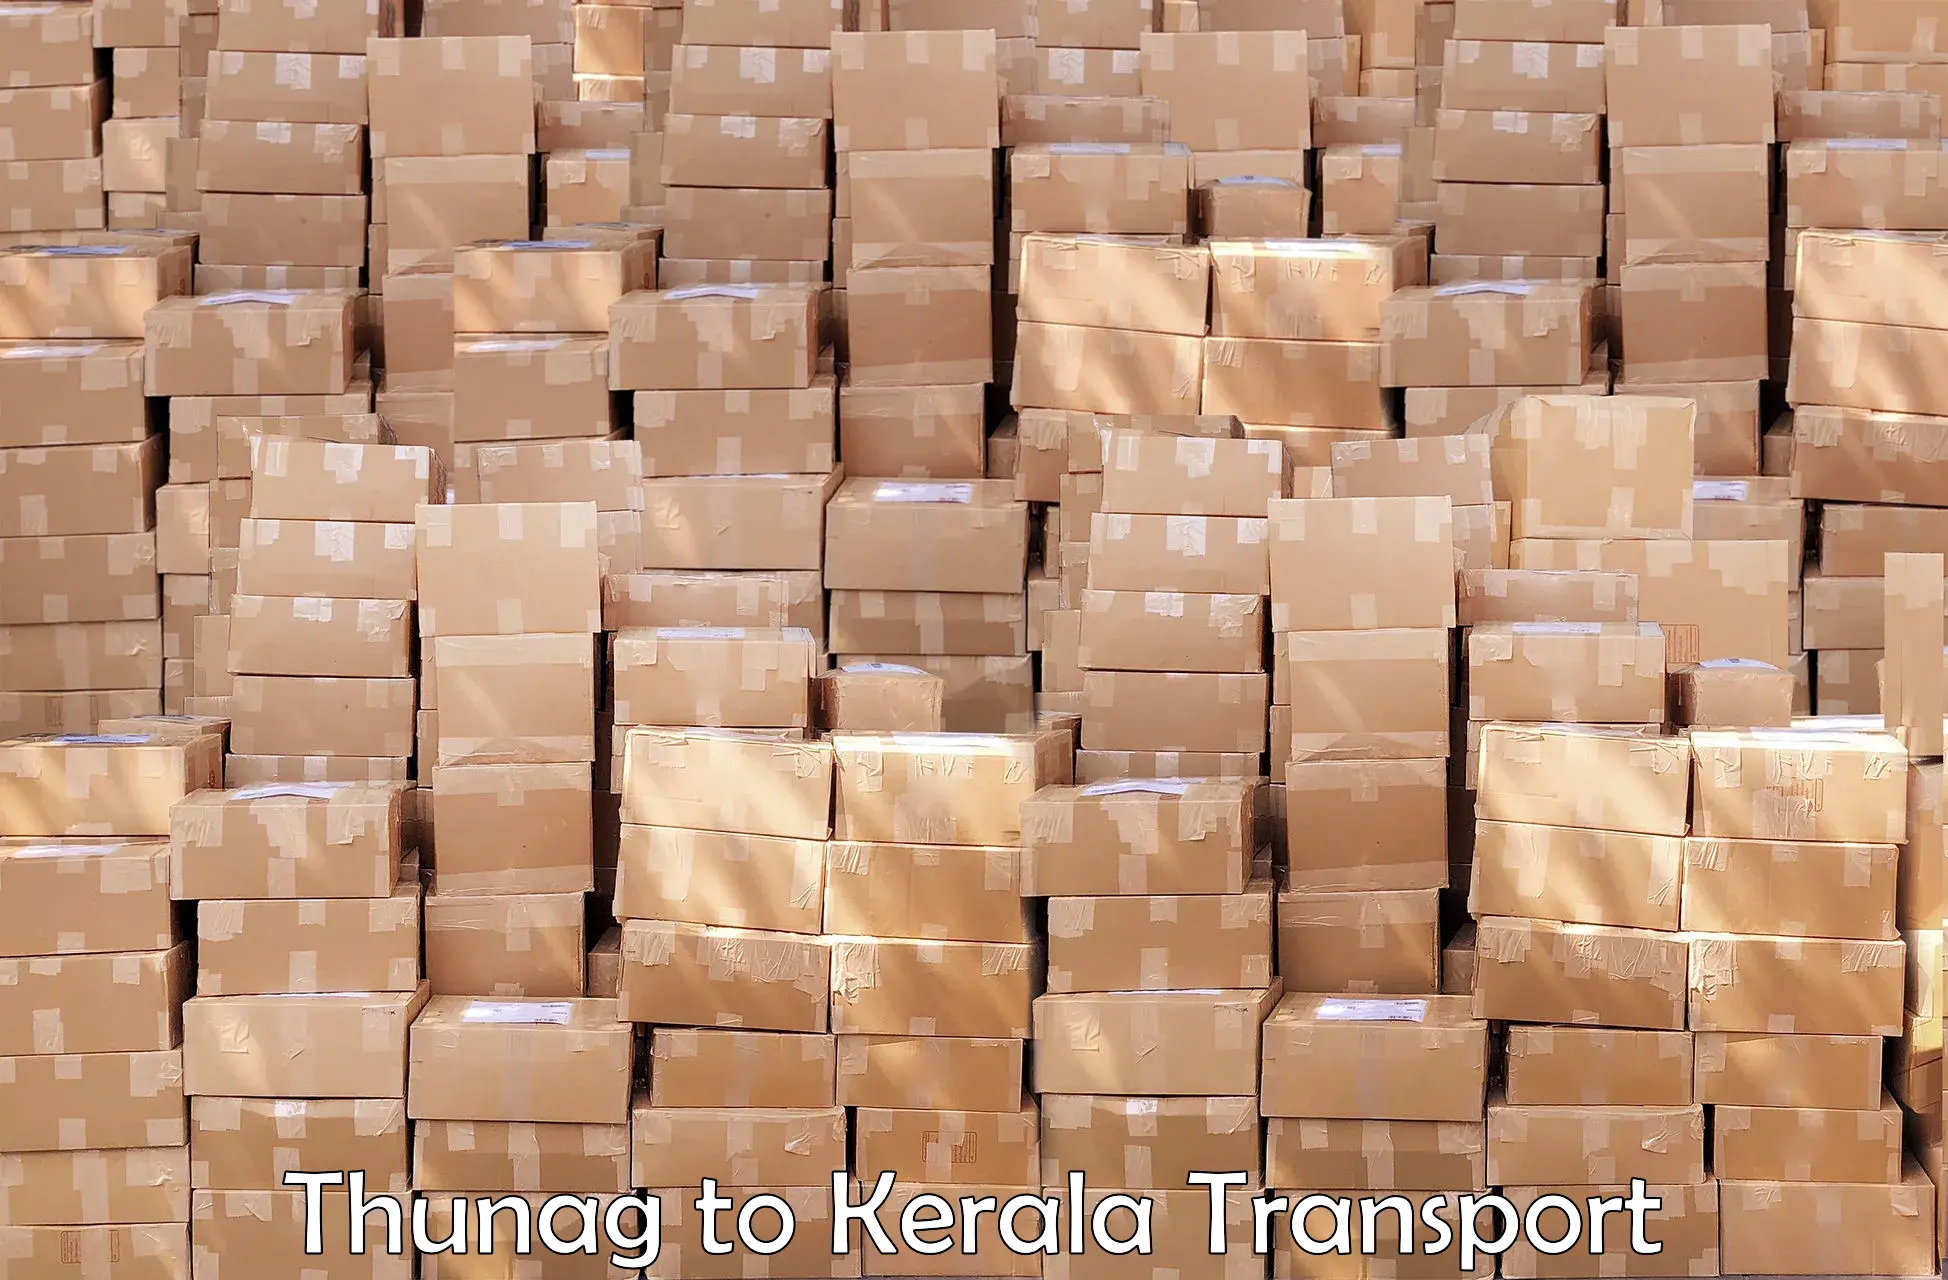 Container transport service Thunag to Kuttiady